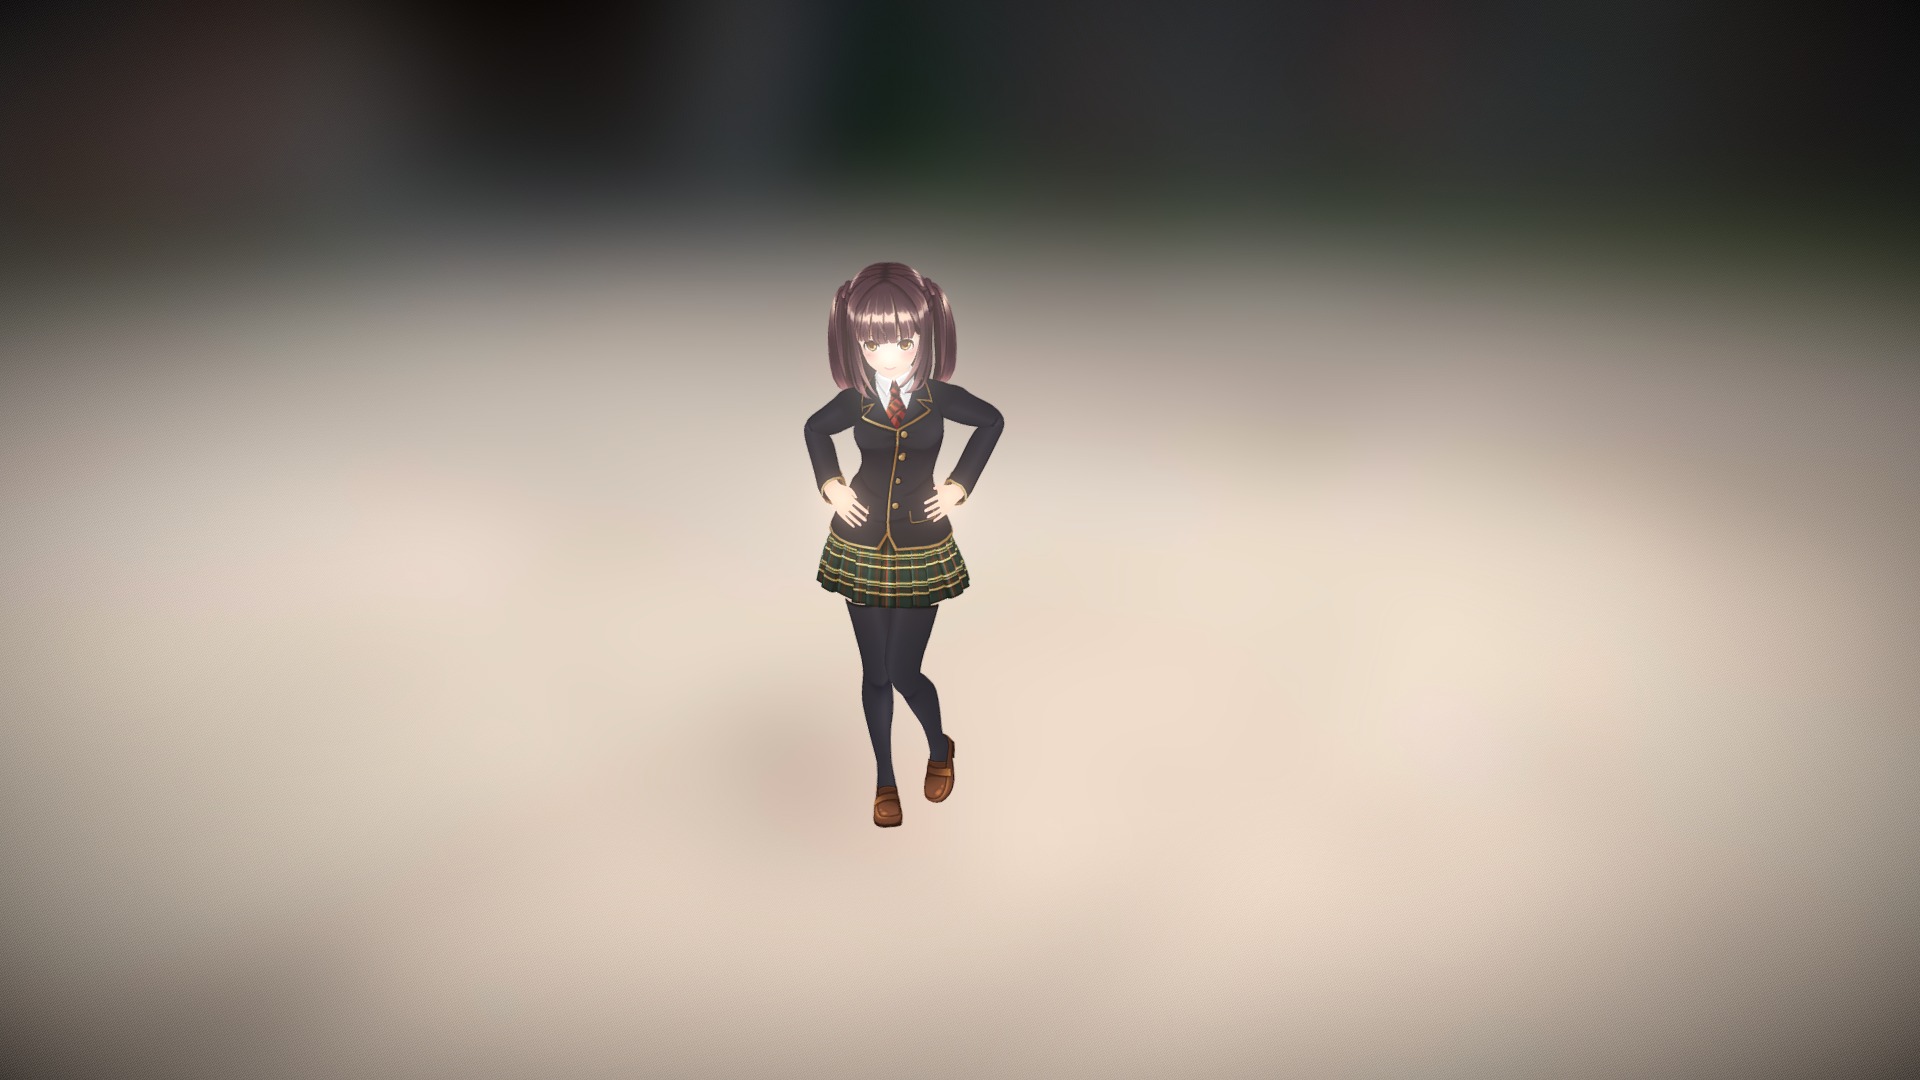 The main character  is a Japanese high school girl. She looks cute and good looking but this girl has the ability to use weapons such as Spear, Bow and Magic proficiently.

The package is focused on expressing the character traits of this girl. Including casual action and personality, strong action 3d model